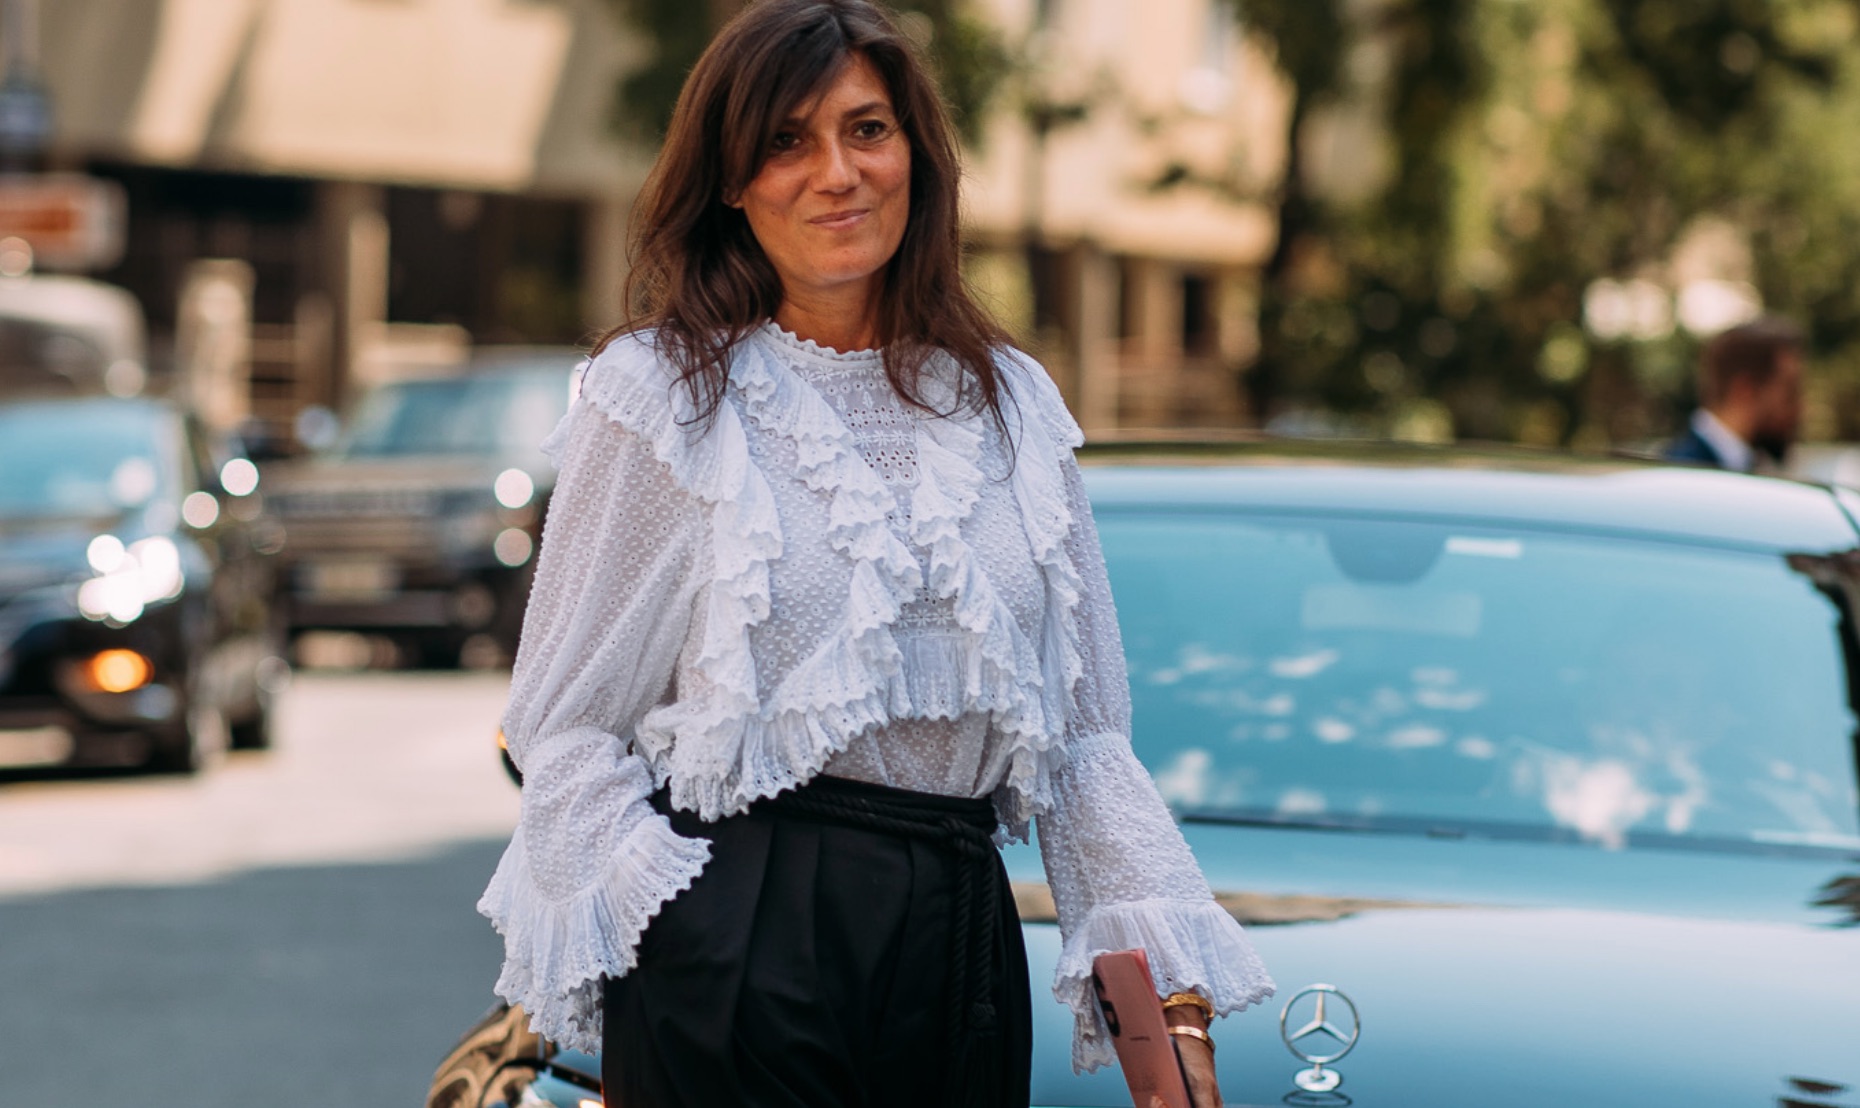 The Romantic Blouses Our Favorite French Vogue Editor Wears Perfectly